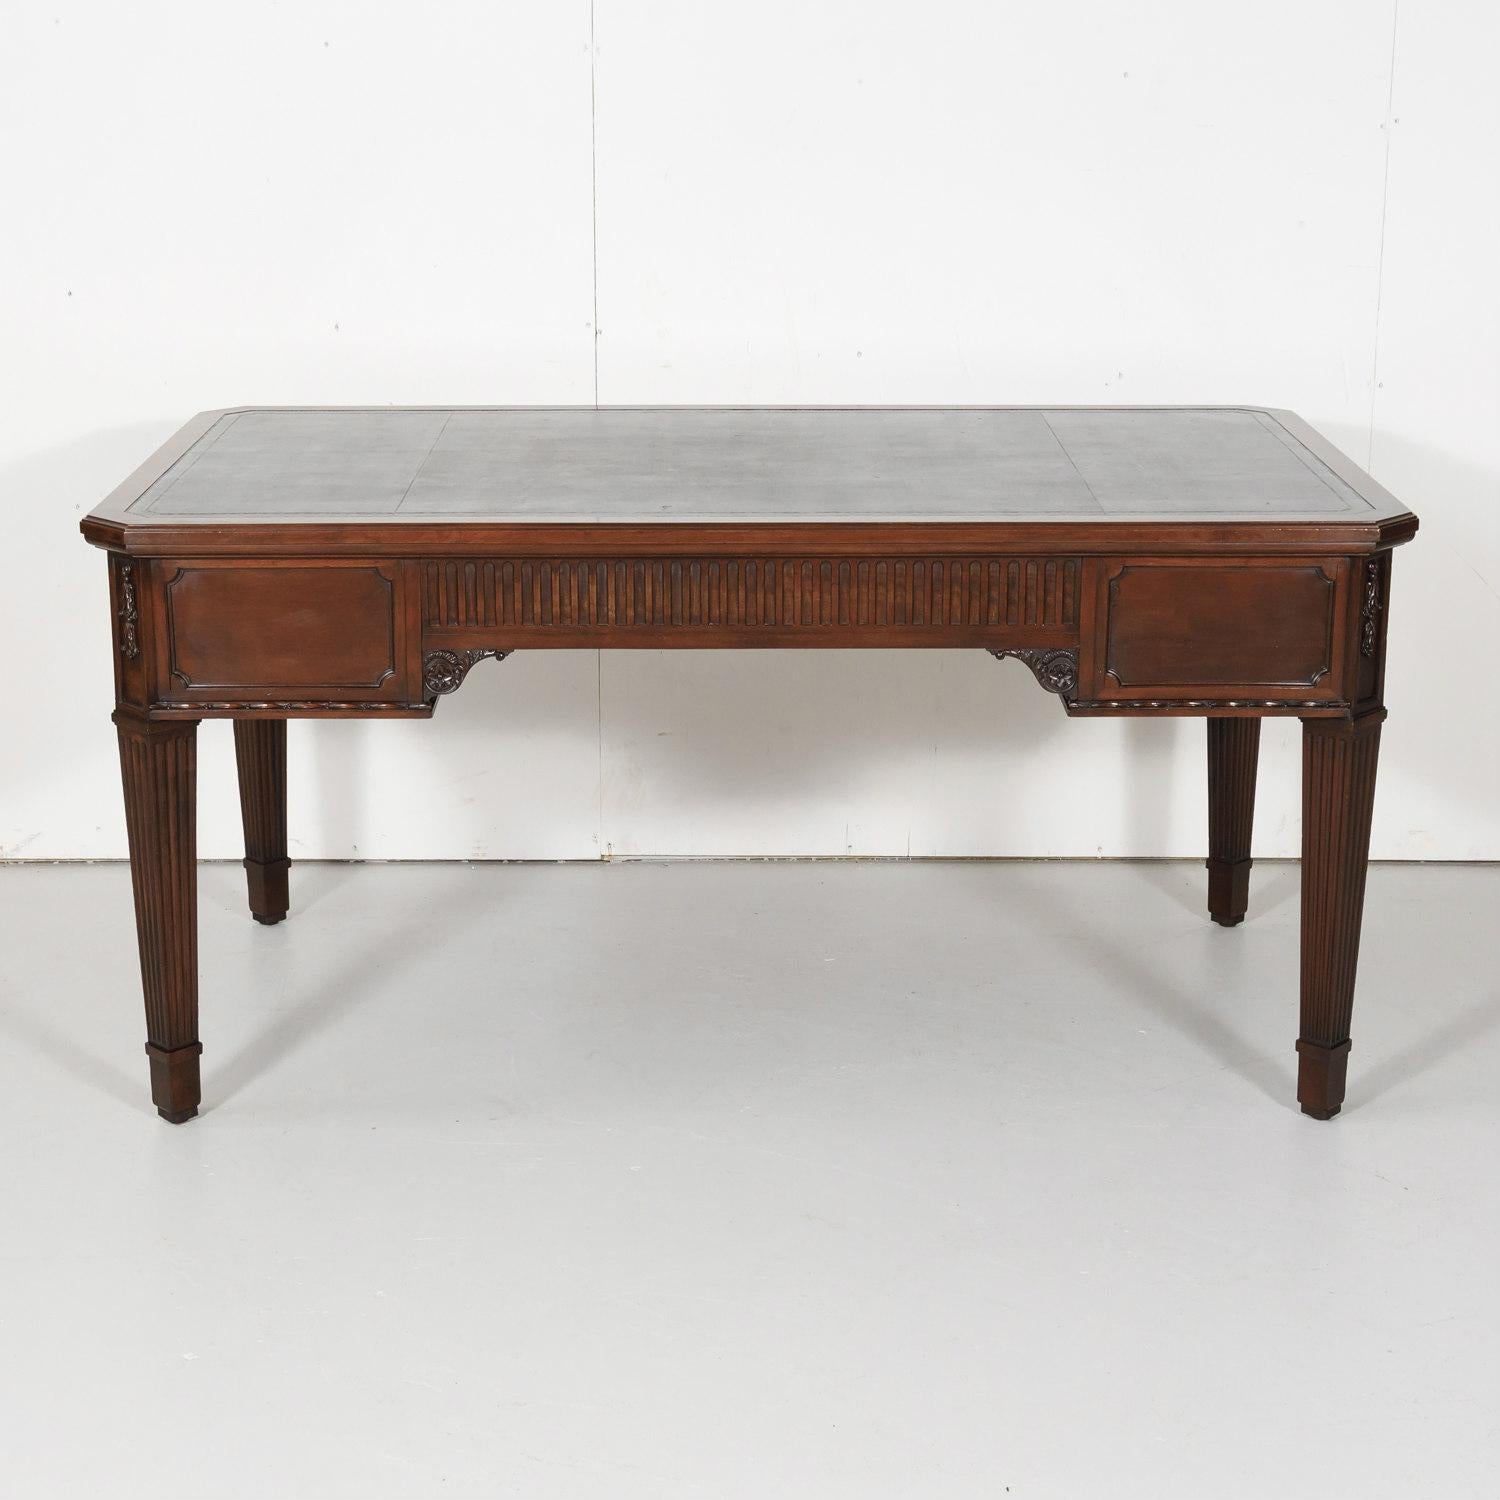 19th Century French Louis XVI Style Walnut Bureau Plat or Desk with Leather Top 14